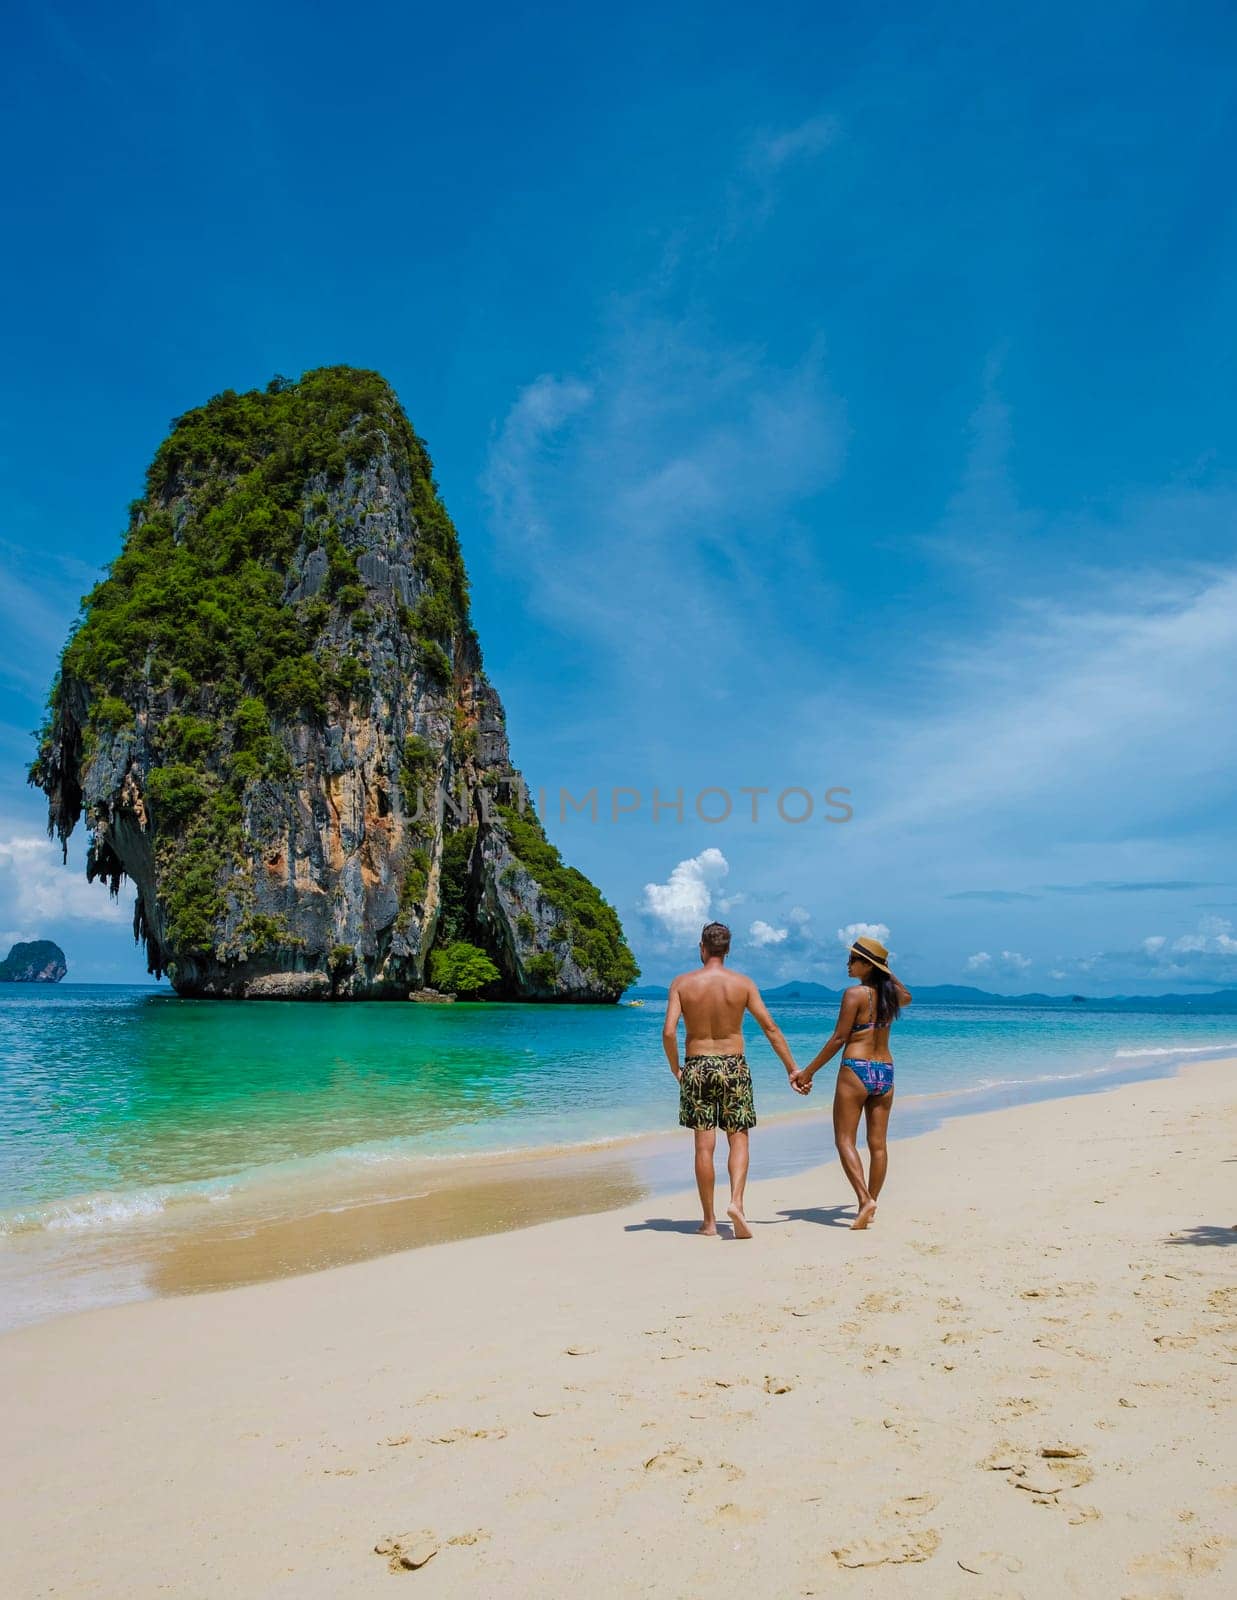 Railay beach Krabi Thailand, tropical beach of Railay Krabi, couple men and woman on the beach, Panoramic view of idyllic Railay Beach in Thailand with a traditional long boat by fokkebok